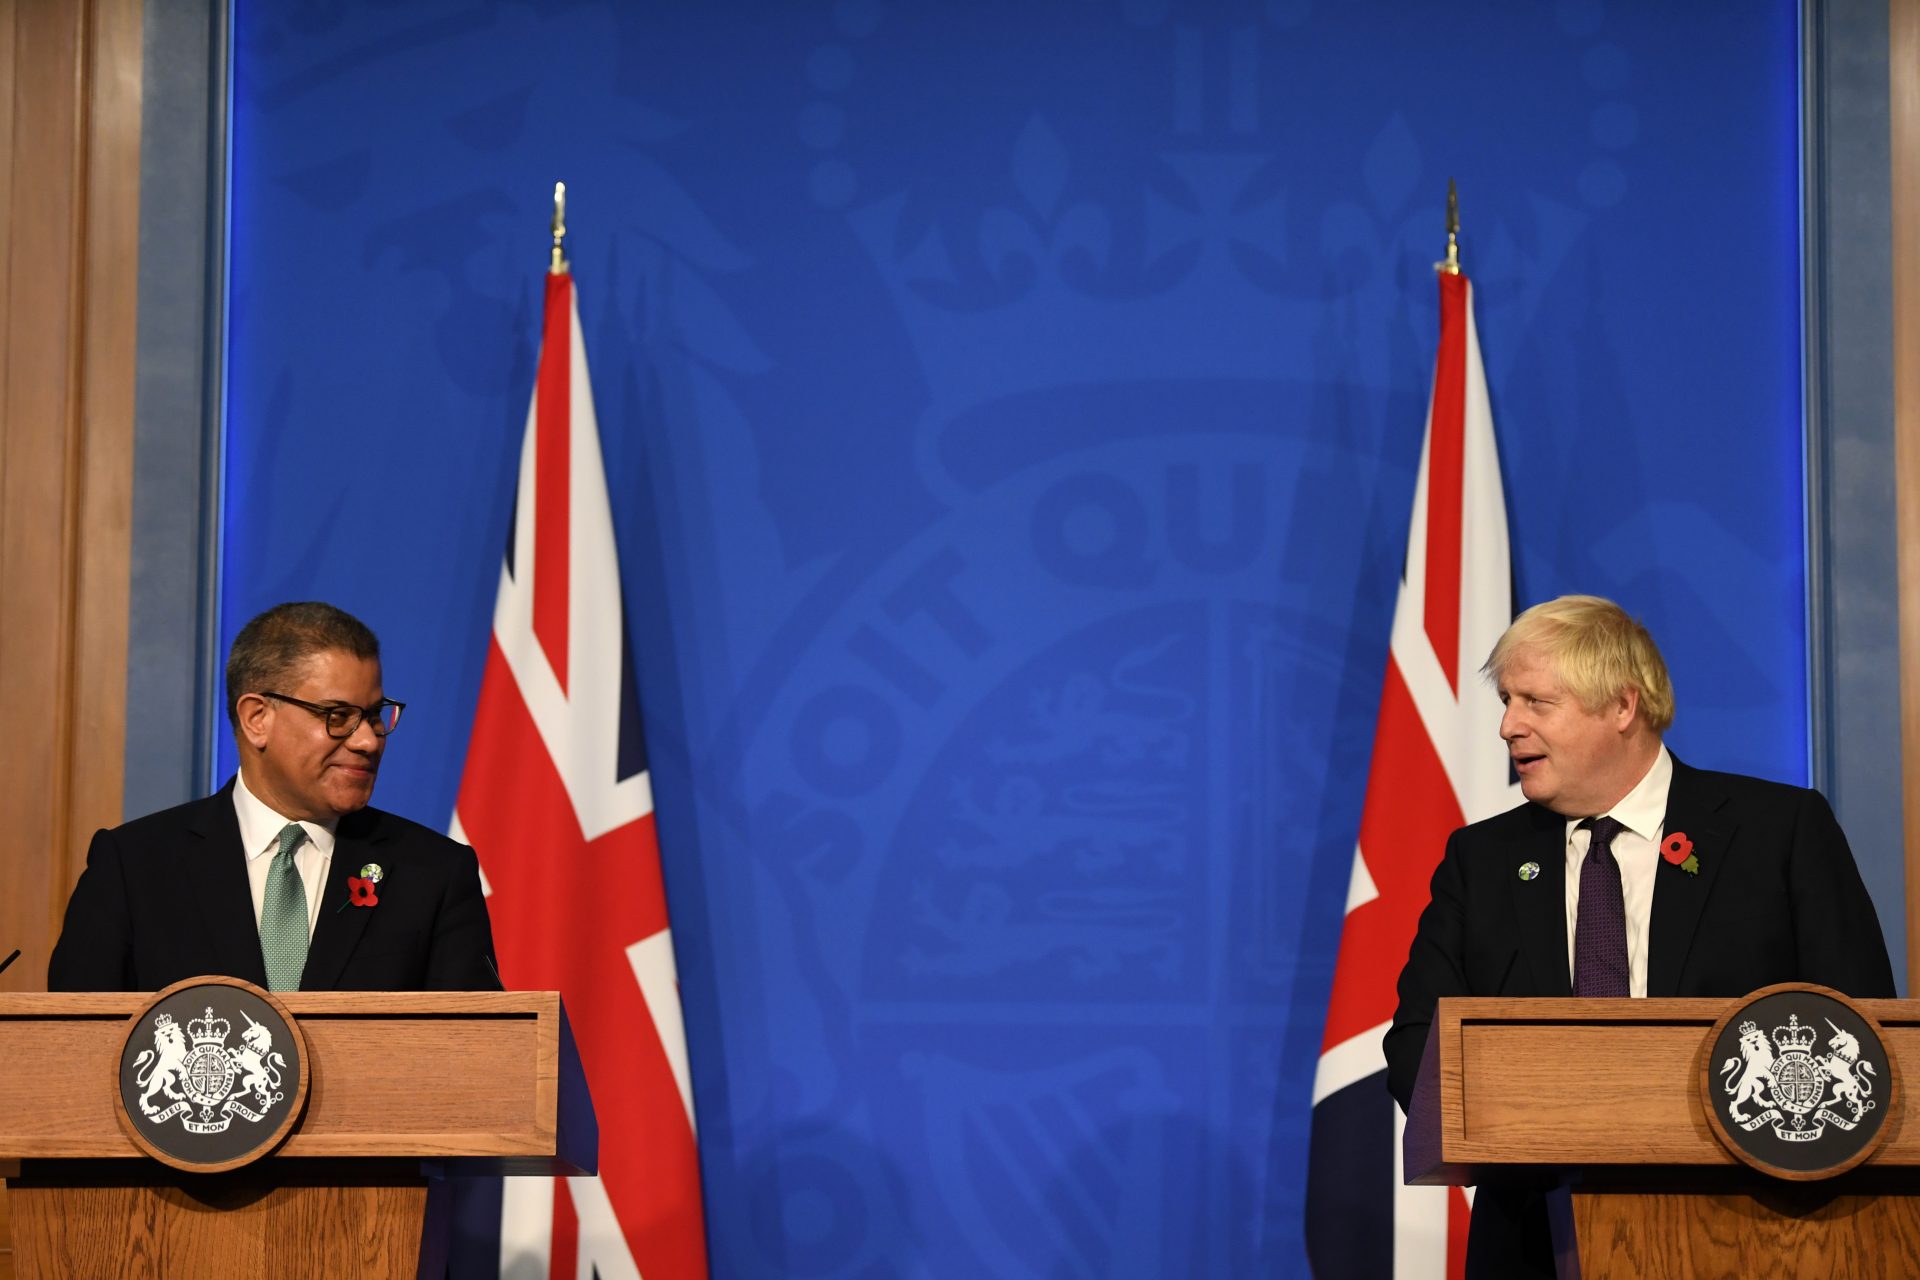 Alok Sharma, President of Cop26, and Boris Johnson, during a press conference about the recent summit. Photo: Daniel Leal/PA Wire/PA Images.